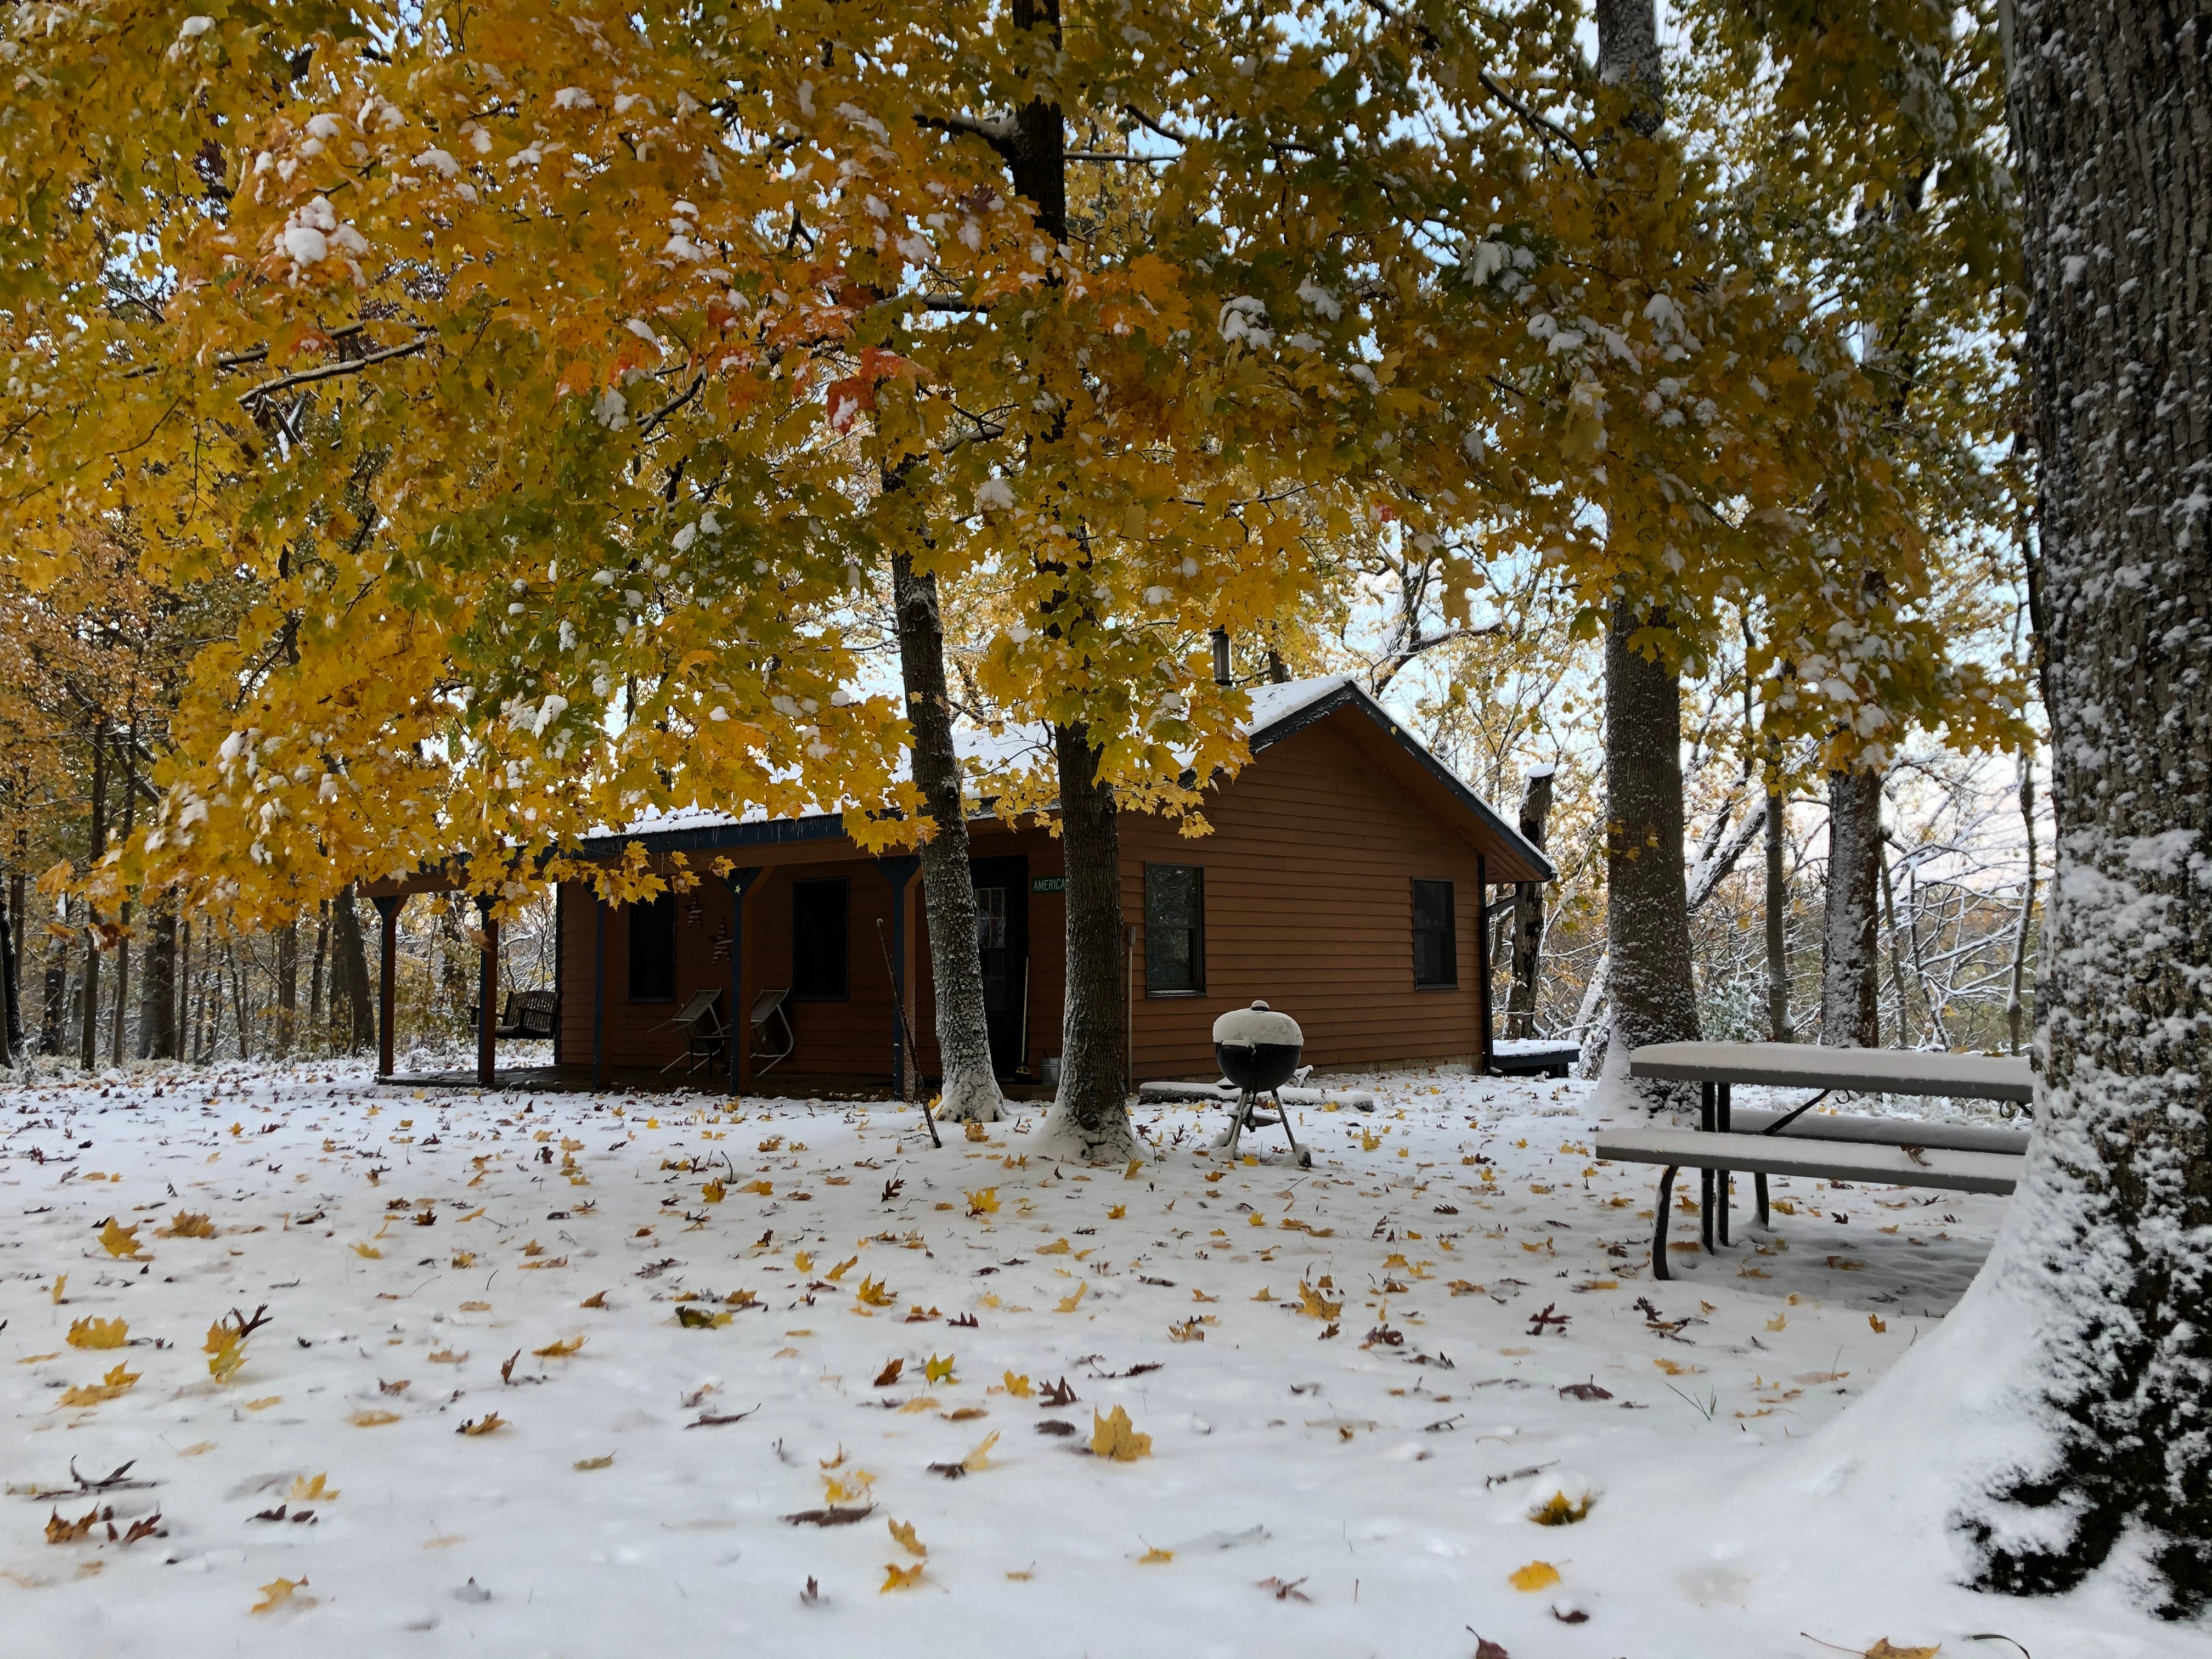 All of our cabins are 4 season cabins with central air & are furnace heated.  So we are open all year with pricing being less from Dec. 1 - March 31.